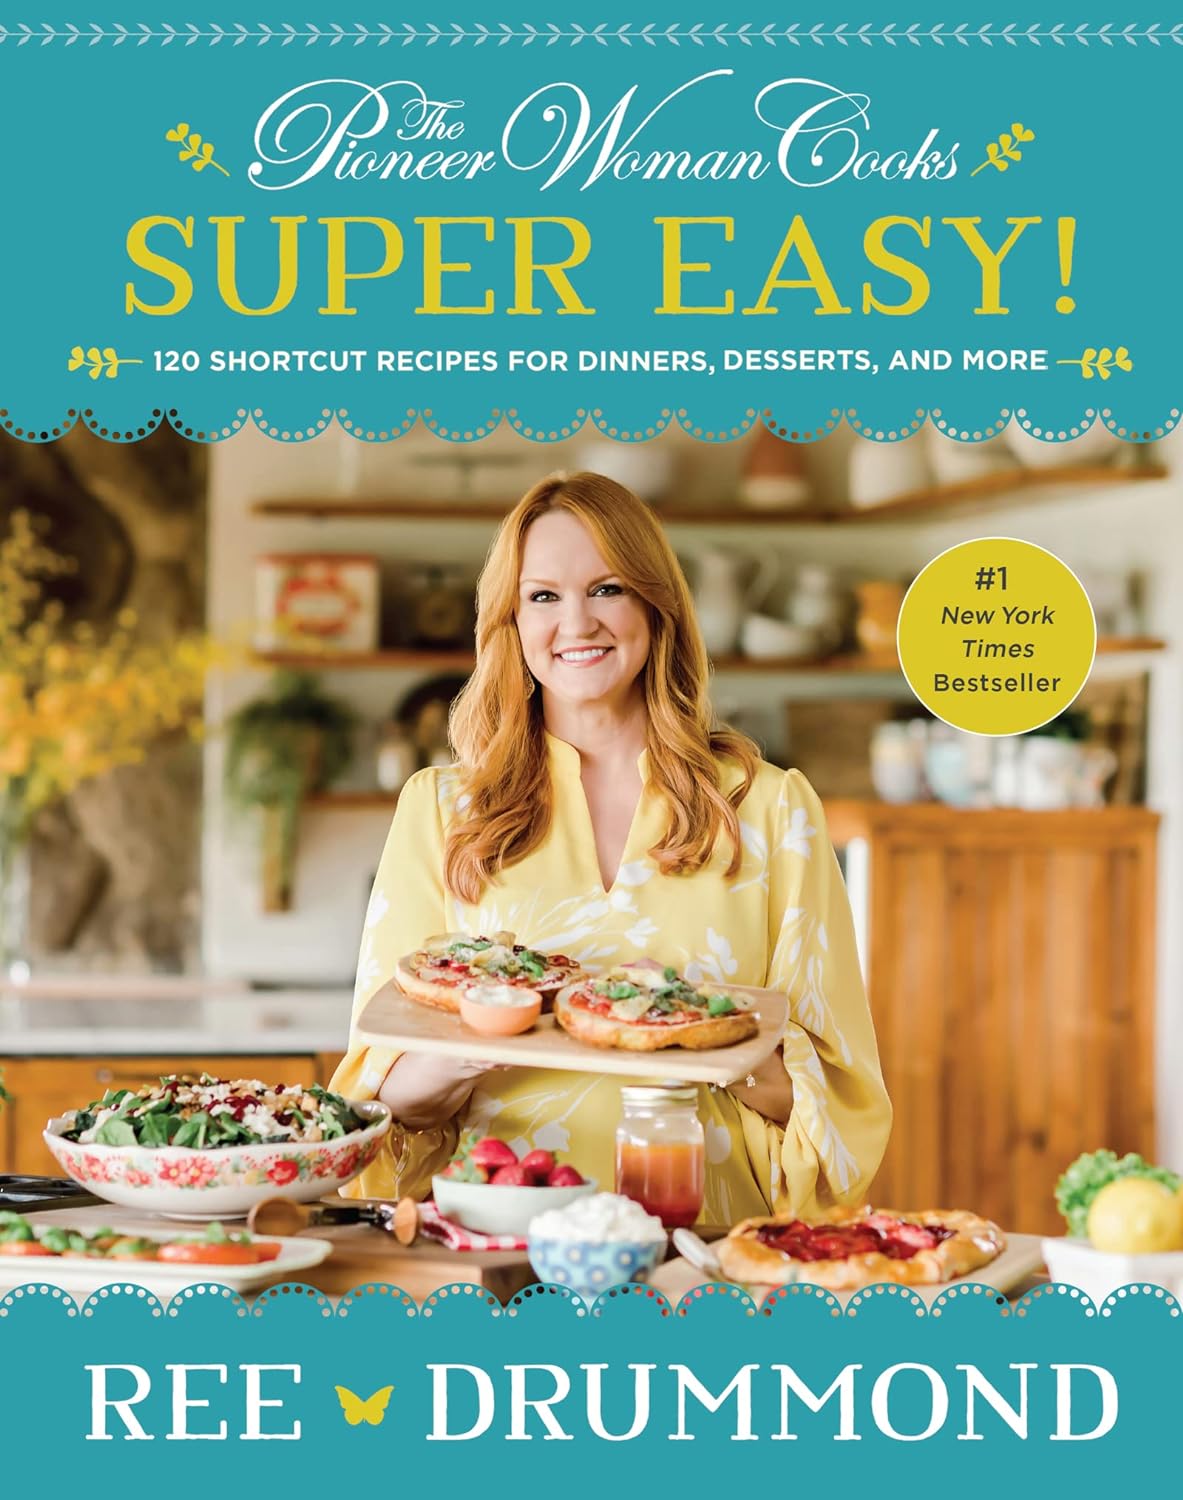 384 Pages - The Pioneer Woman Cooks Super Easy! Cookbook: 120 Shortcut Recipes $11.57 + Free Ship w/Prime or on orders $35+